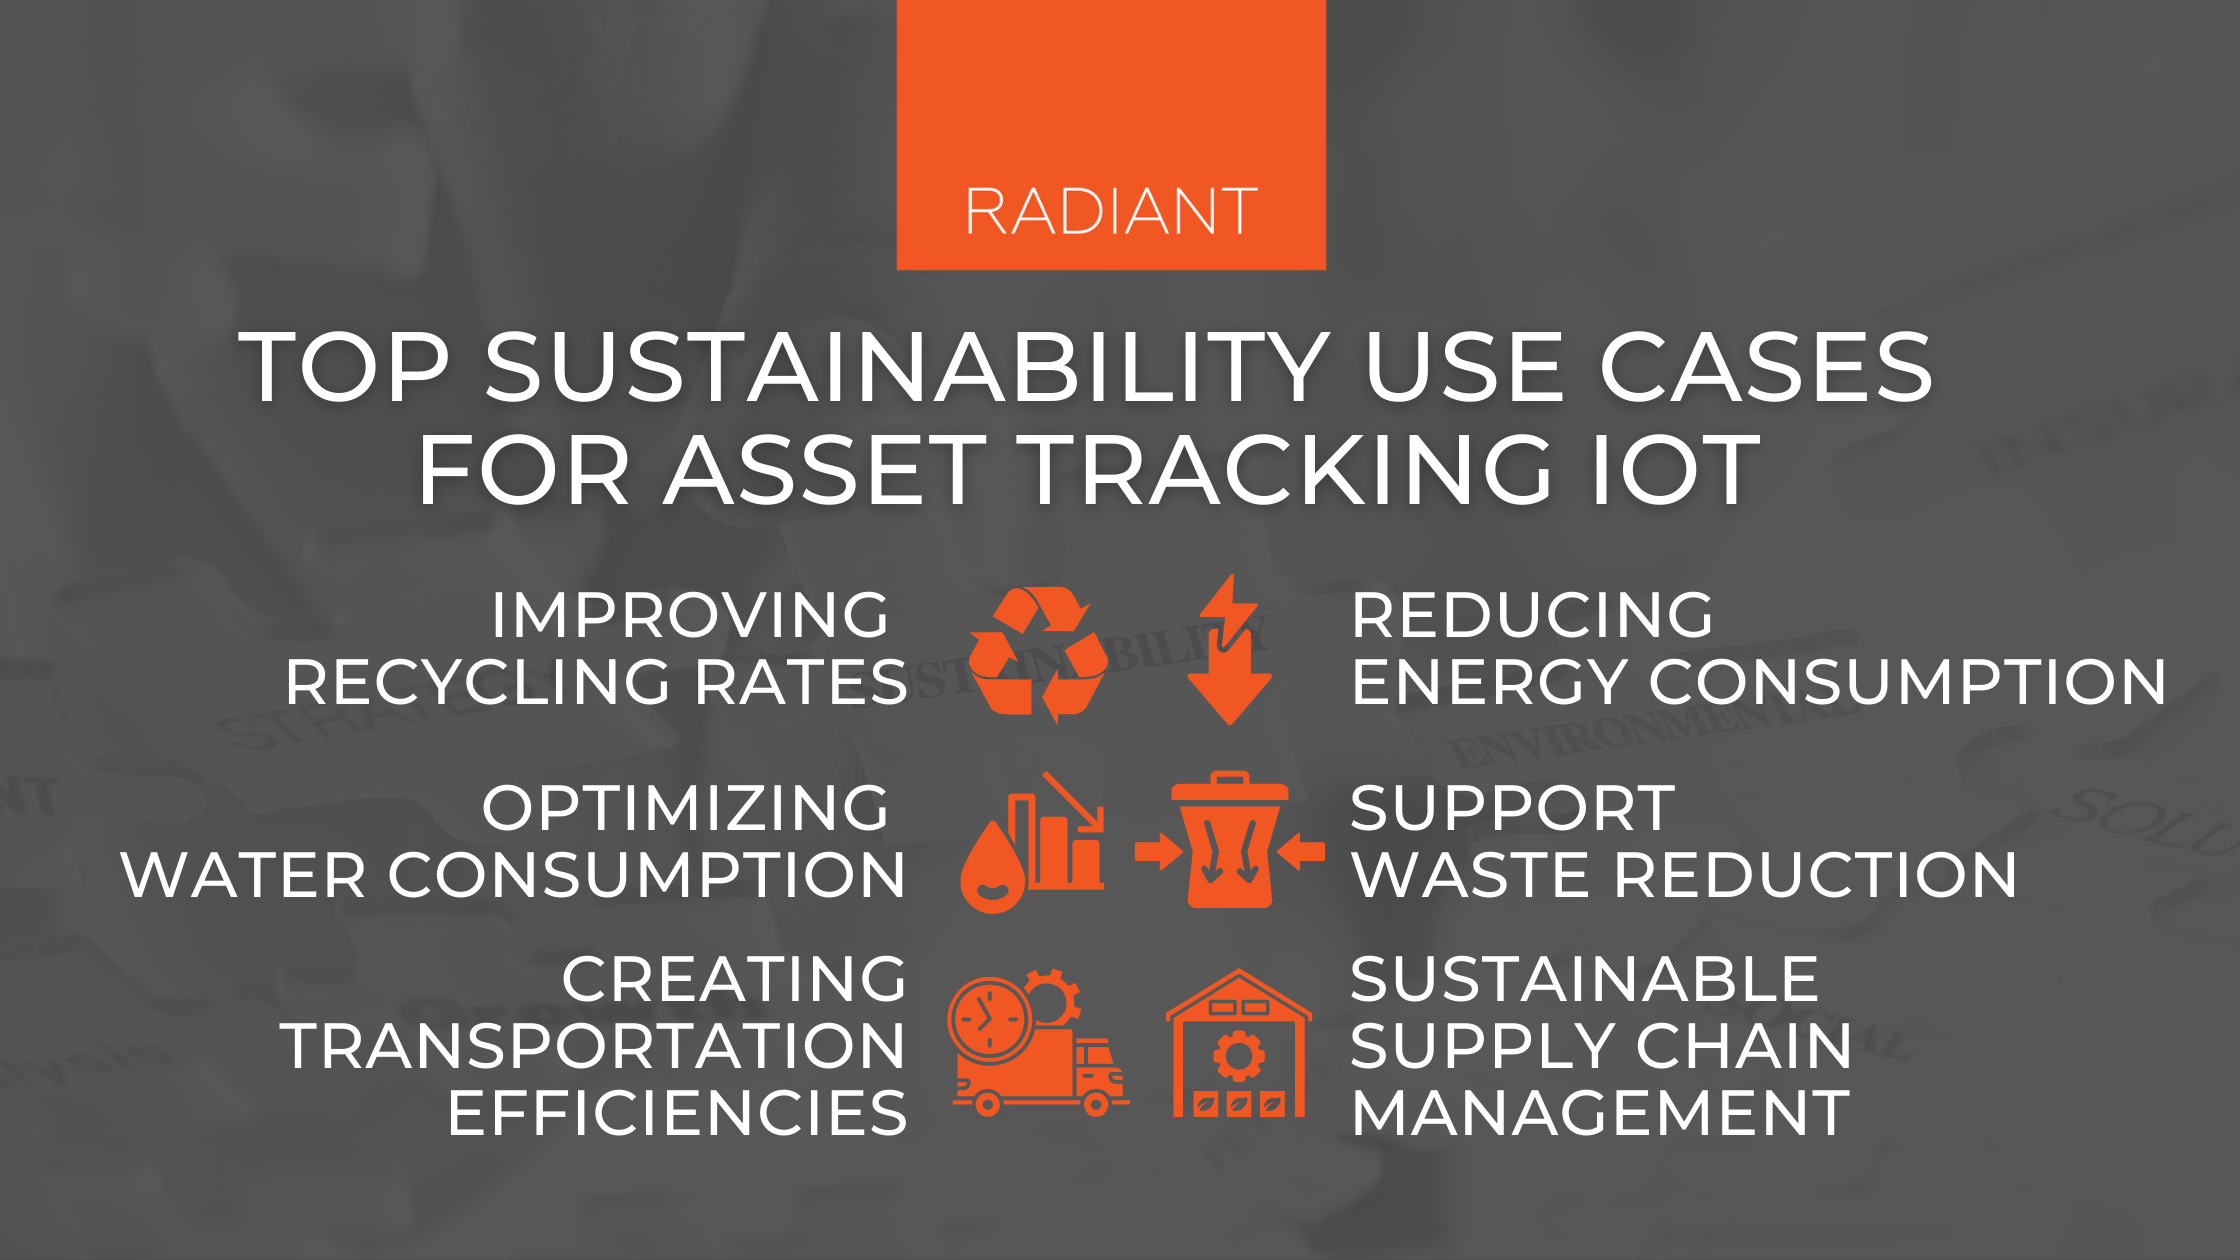 Sustainability Initiatives - Sustainable Practices - Sustainable Businesses - Innovative Environmental Business Ideas - Green Initiatives For Businesses - Green Initiatives In The Workplace - Sustainability Strategy - Asset Tracking IoT - Asset Tracking IoT Solutions - Sustainability Strategies - IoT Asset Tracking - IoT Asset Tracking Solutions